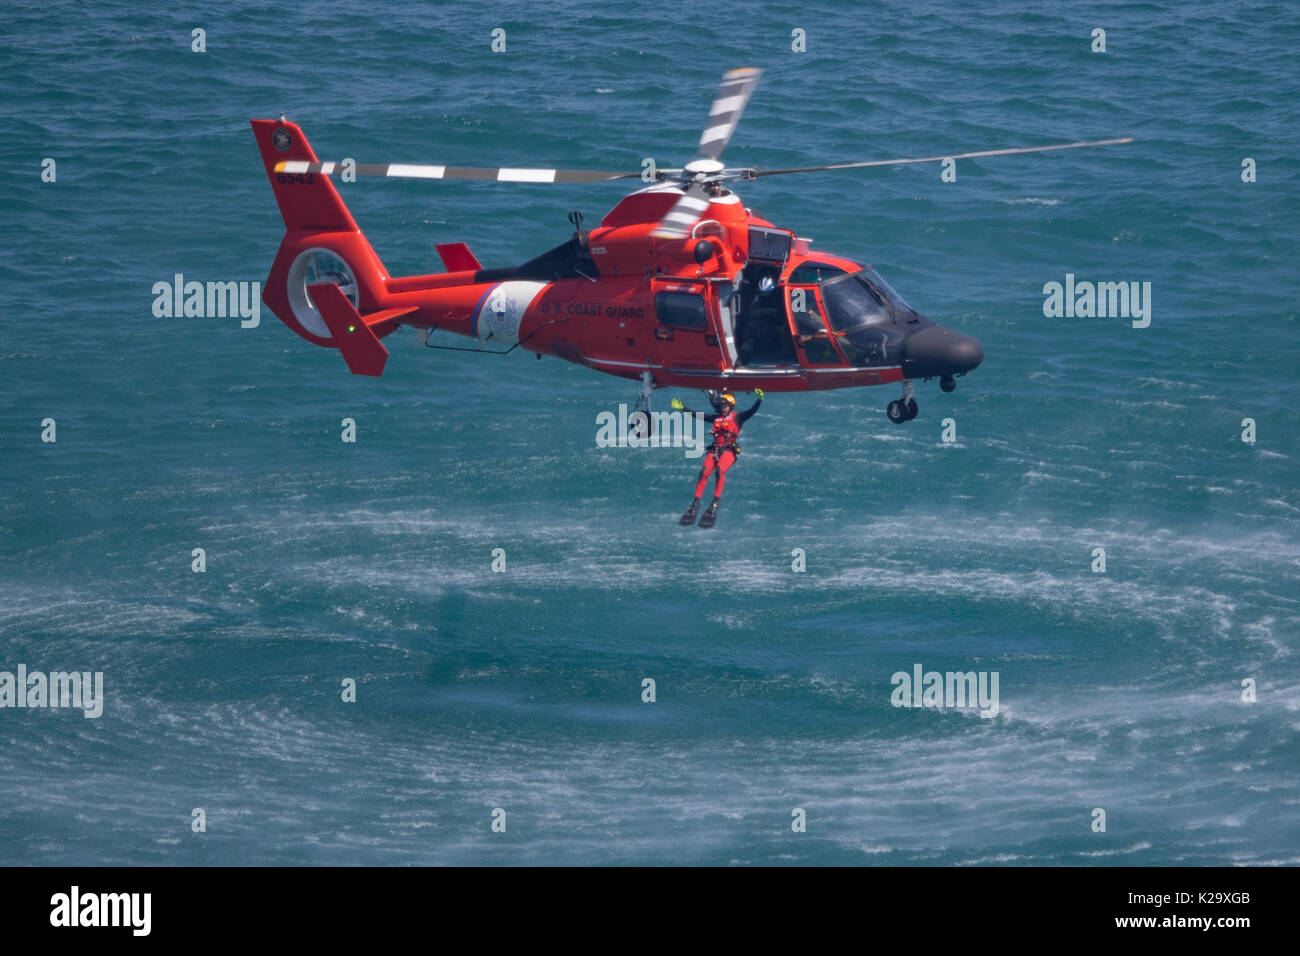 August 19, 2017: Chicago, Illinois, U.S. - U.S. Coast Guard Helicopter MH-65 Dolphin performs over Lake Michigan during the 2017 Chicago Air and Water Show in Chicago, IL. Stock Photo